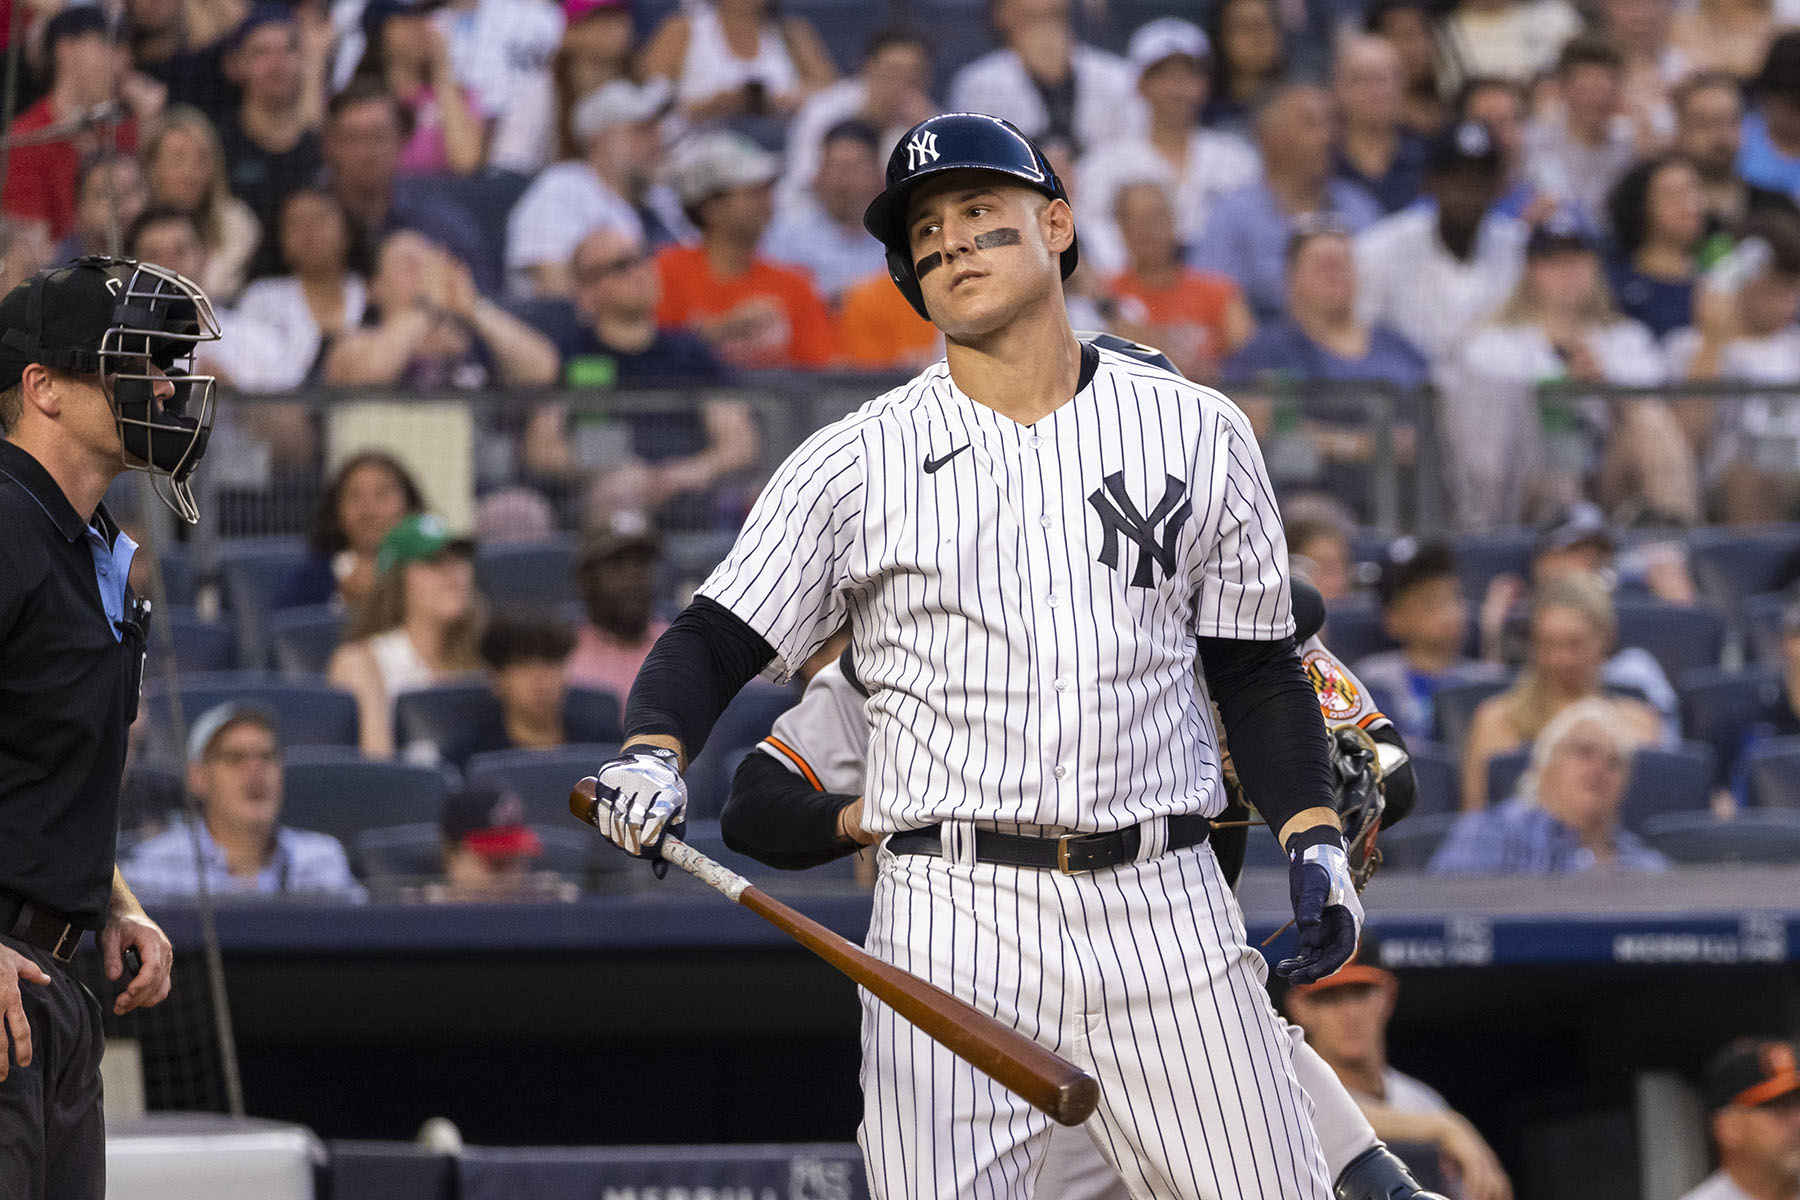 What channel is the Yankee game on today? How to watch Yankees vs